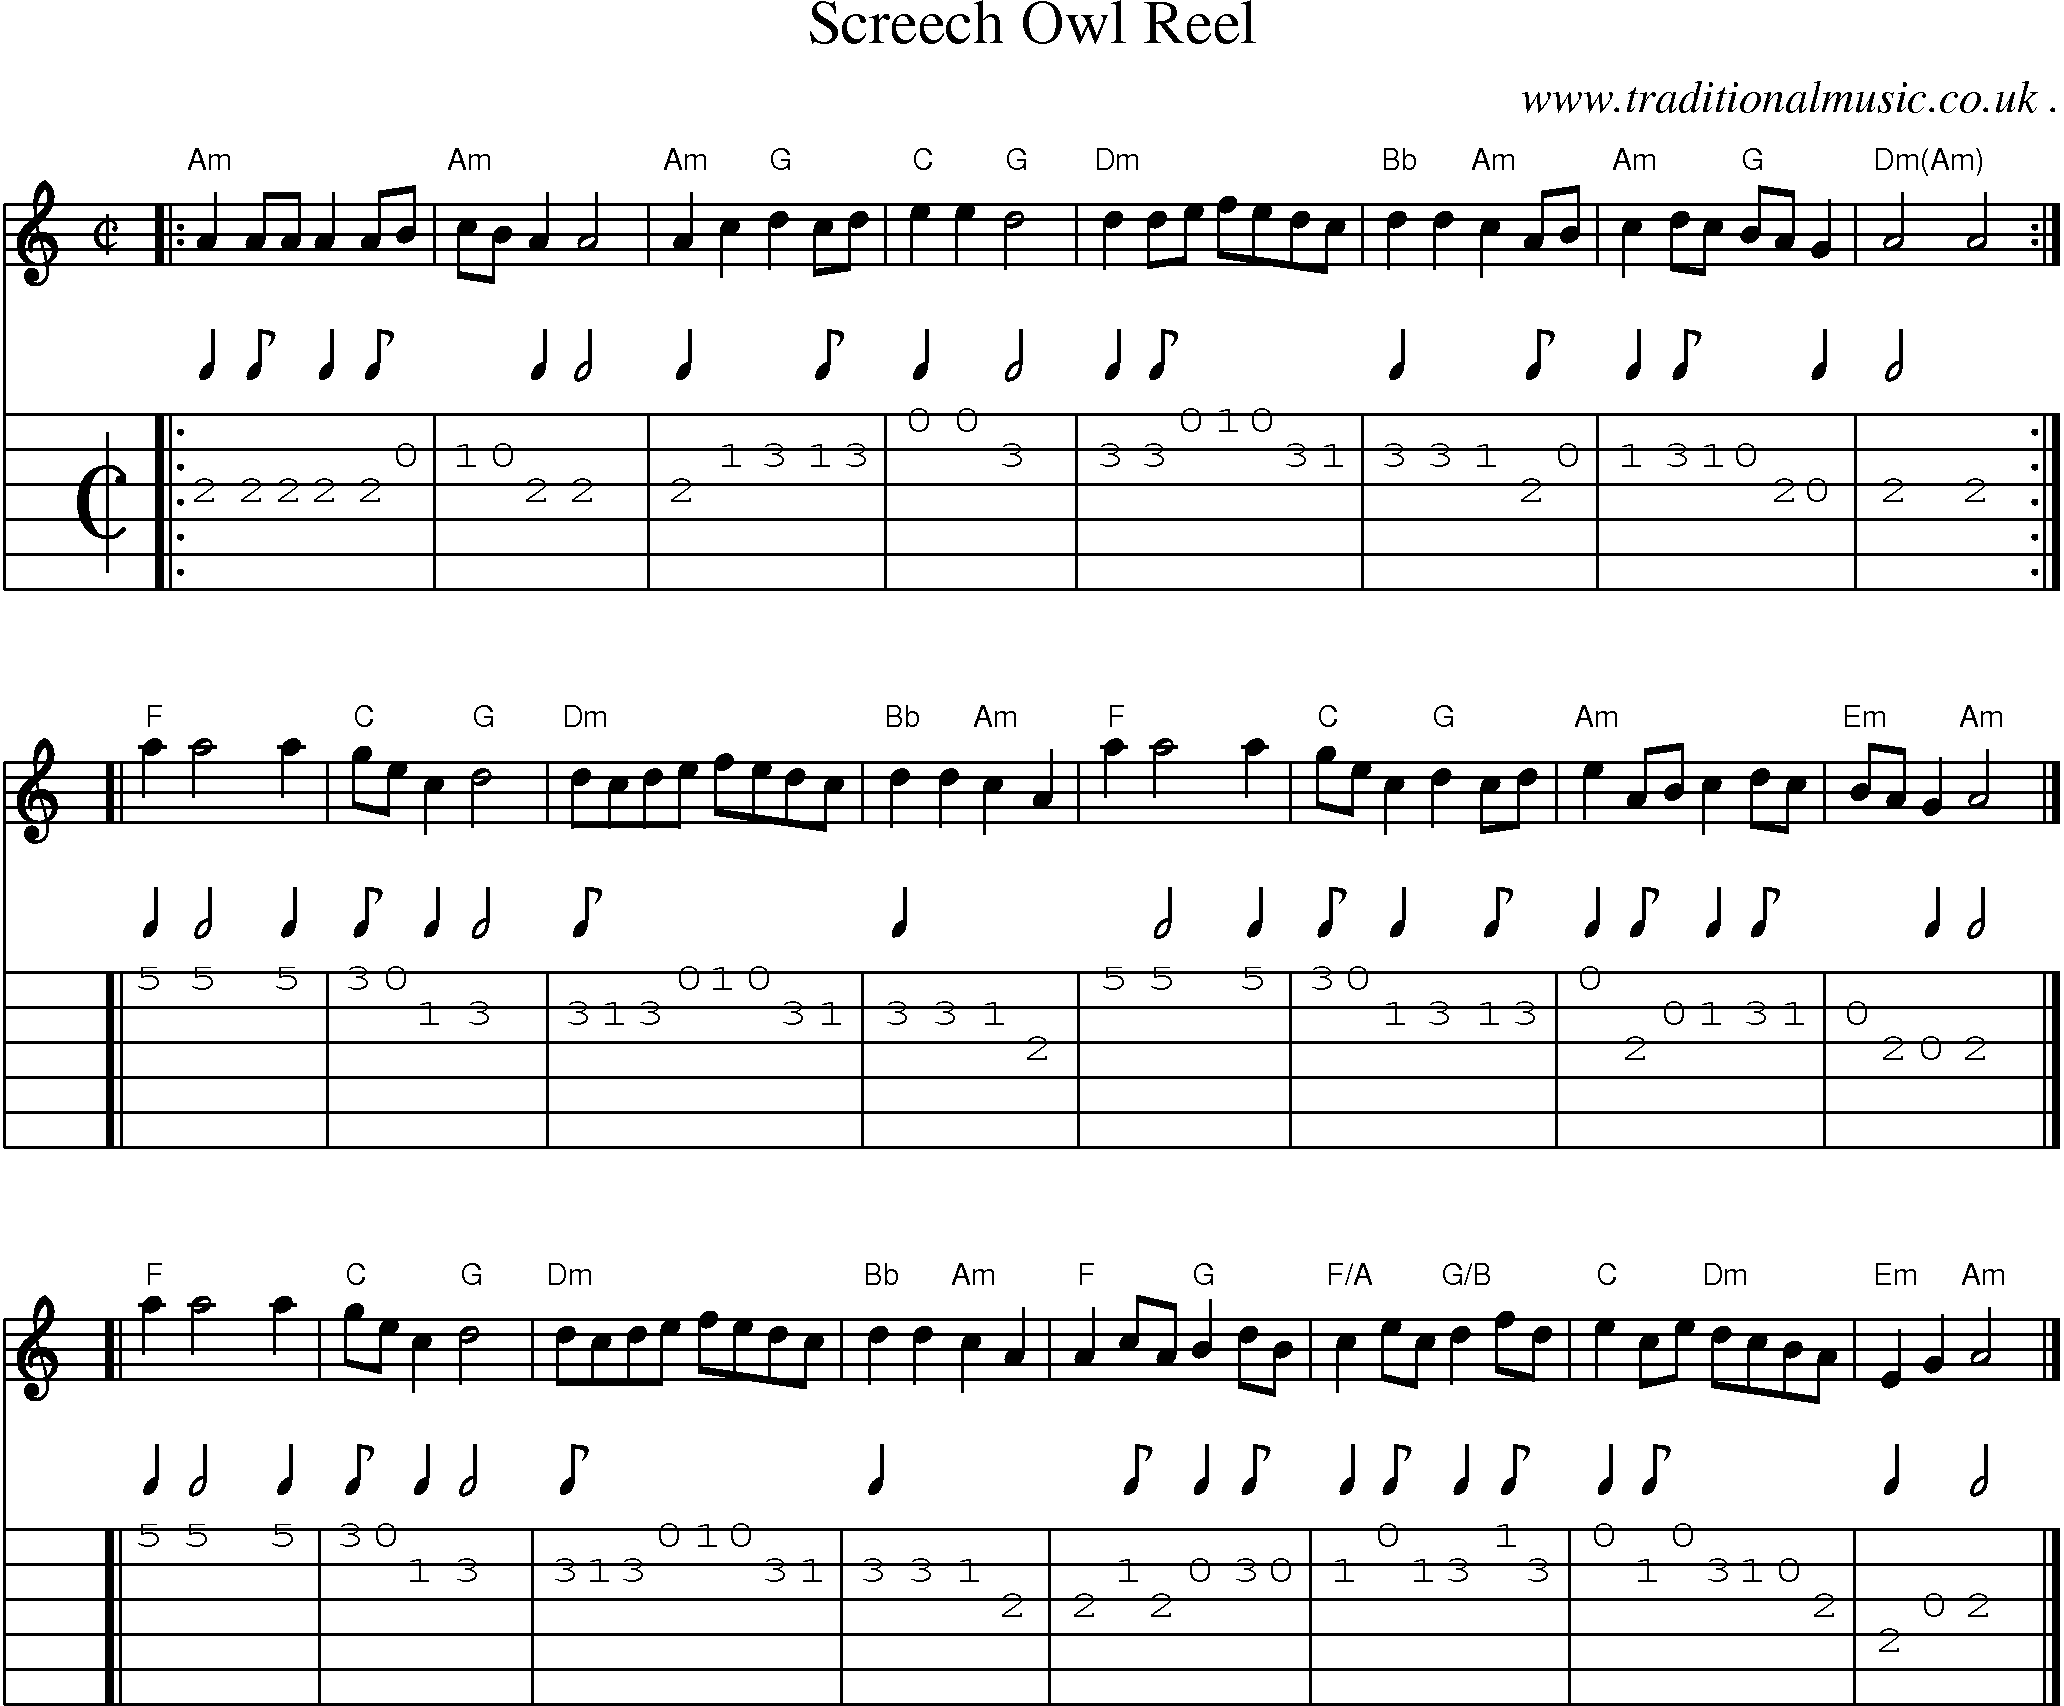 Sheet-music  score, Chords and Guitar Tabs for Screech Owl Reel